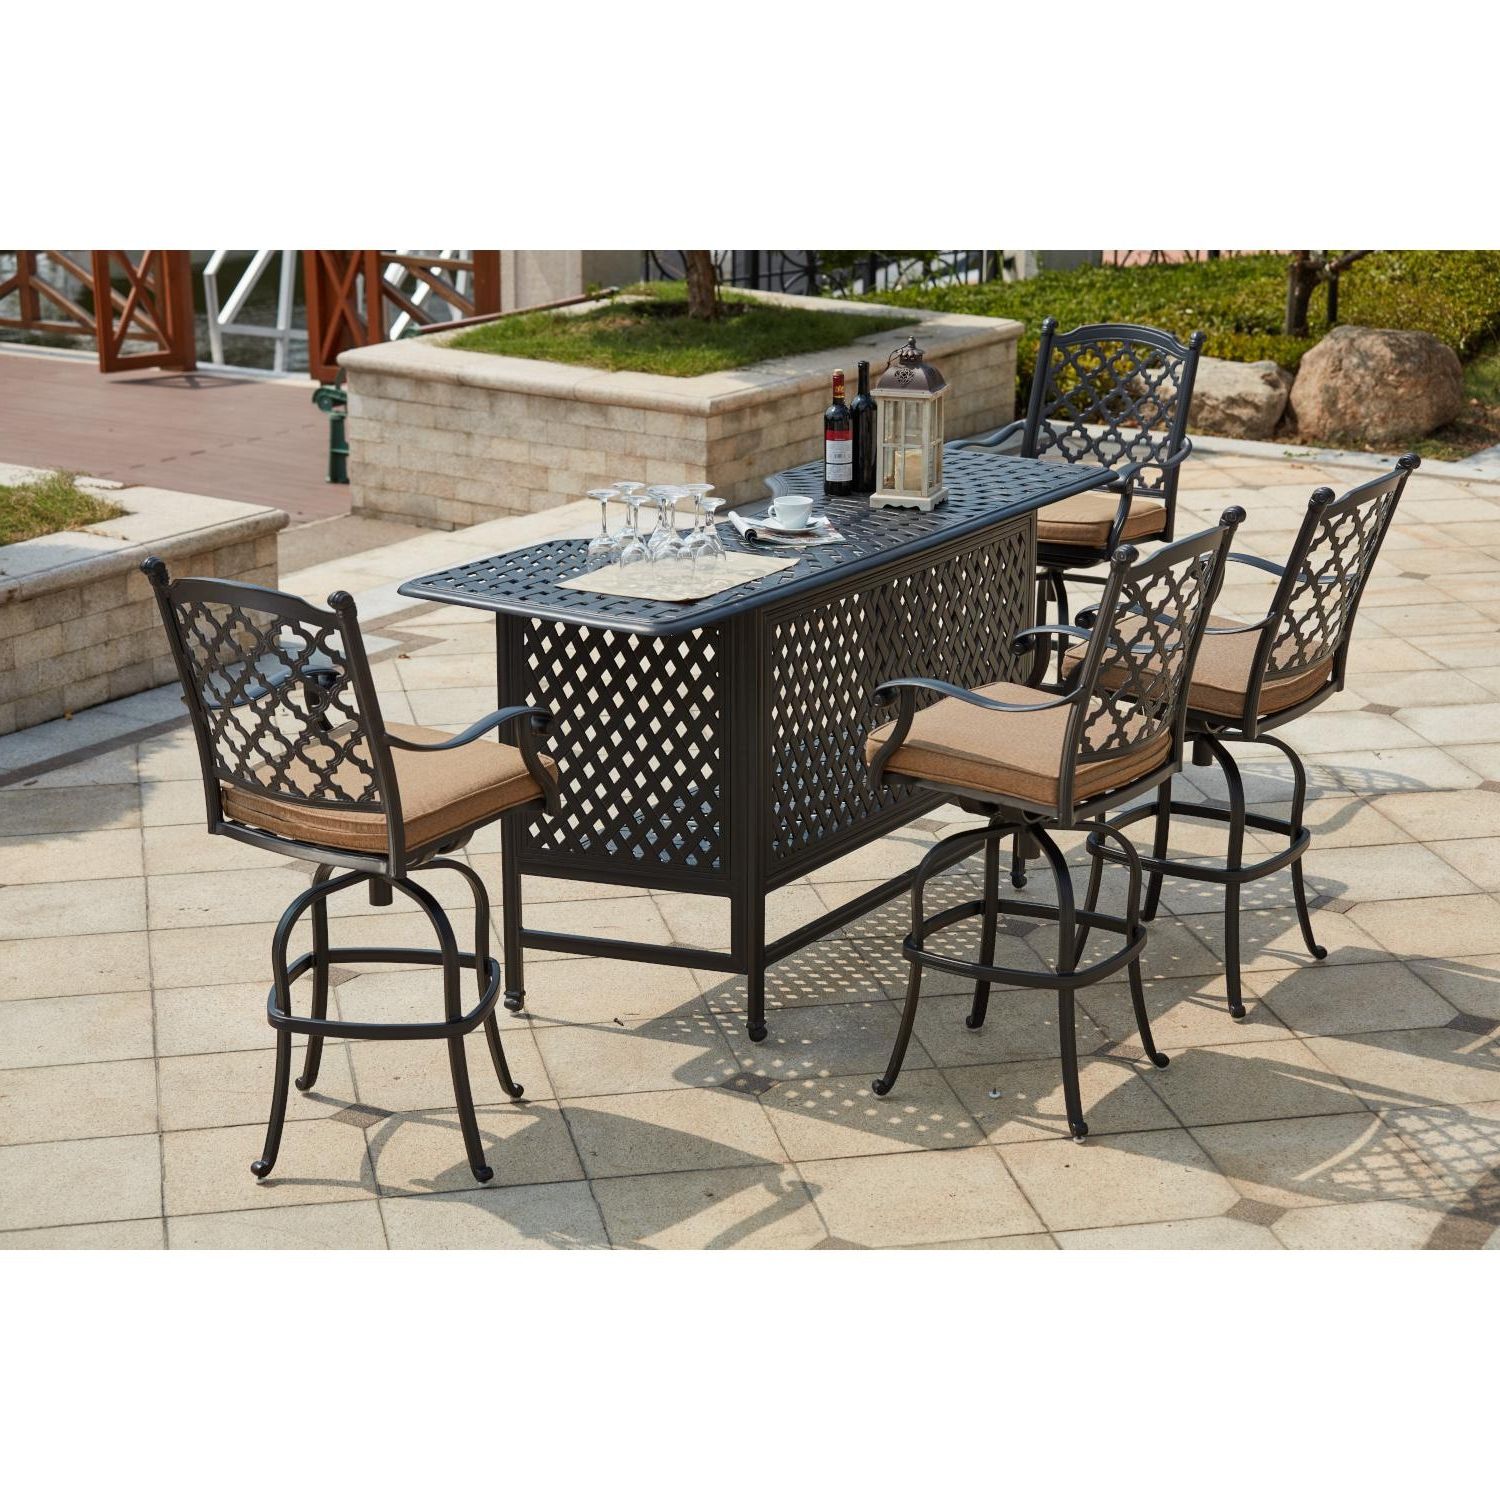 5 Piece Outdoor Bar Tables Within Latest Darleedarlee Madison 5 Piece Cast Aluminum Patio Party Bar Set W (View 2 of 15)